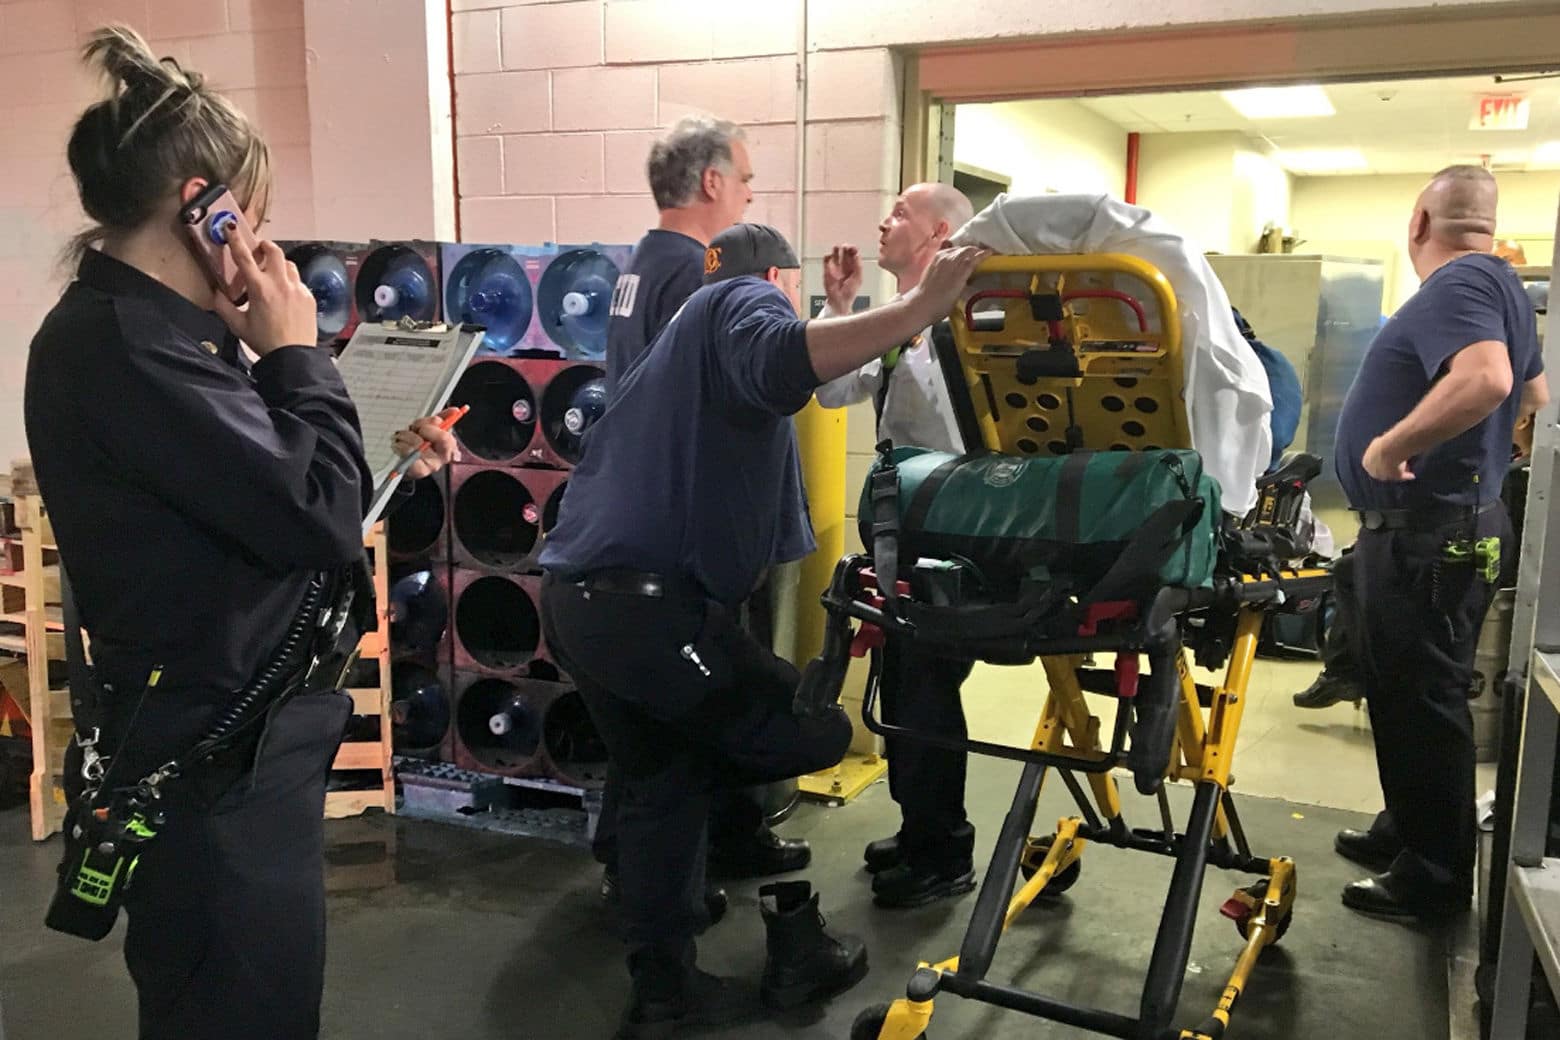 D.C. Fire and EMS rescued 26 people from a stalled elevator on Massachusetts Ave. in Northwest D.C. (Courtesy D.C. Fire and EMS)